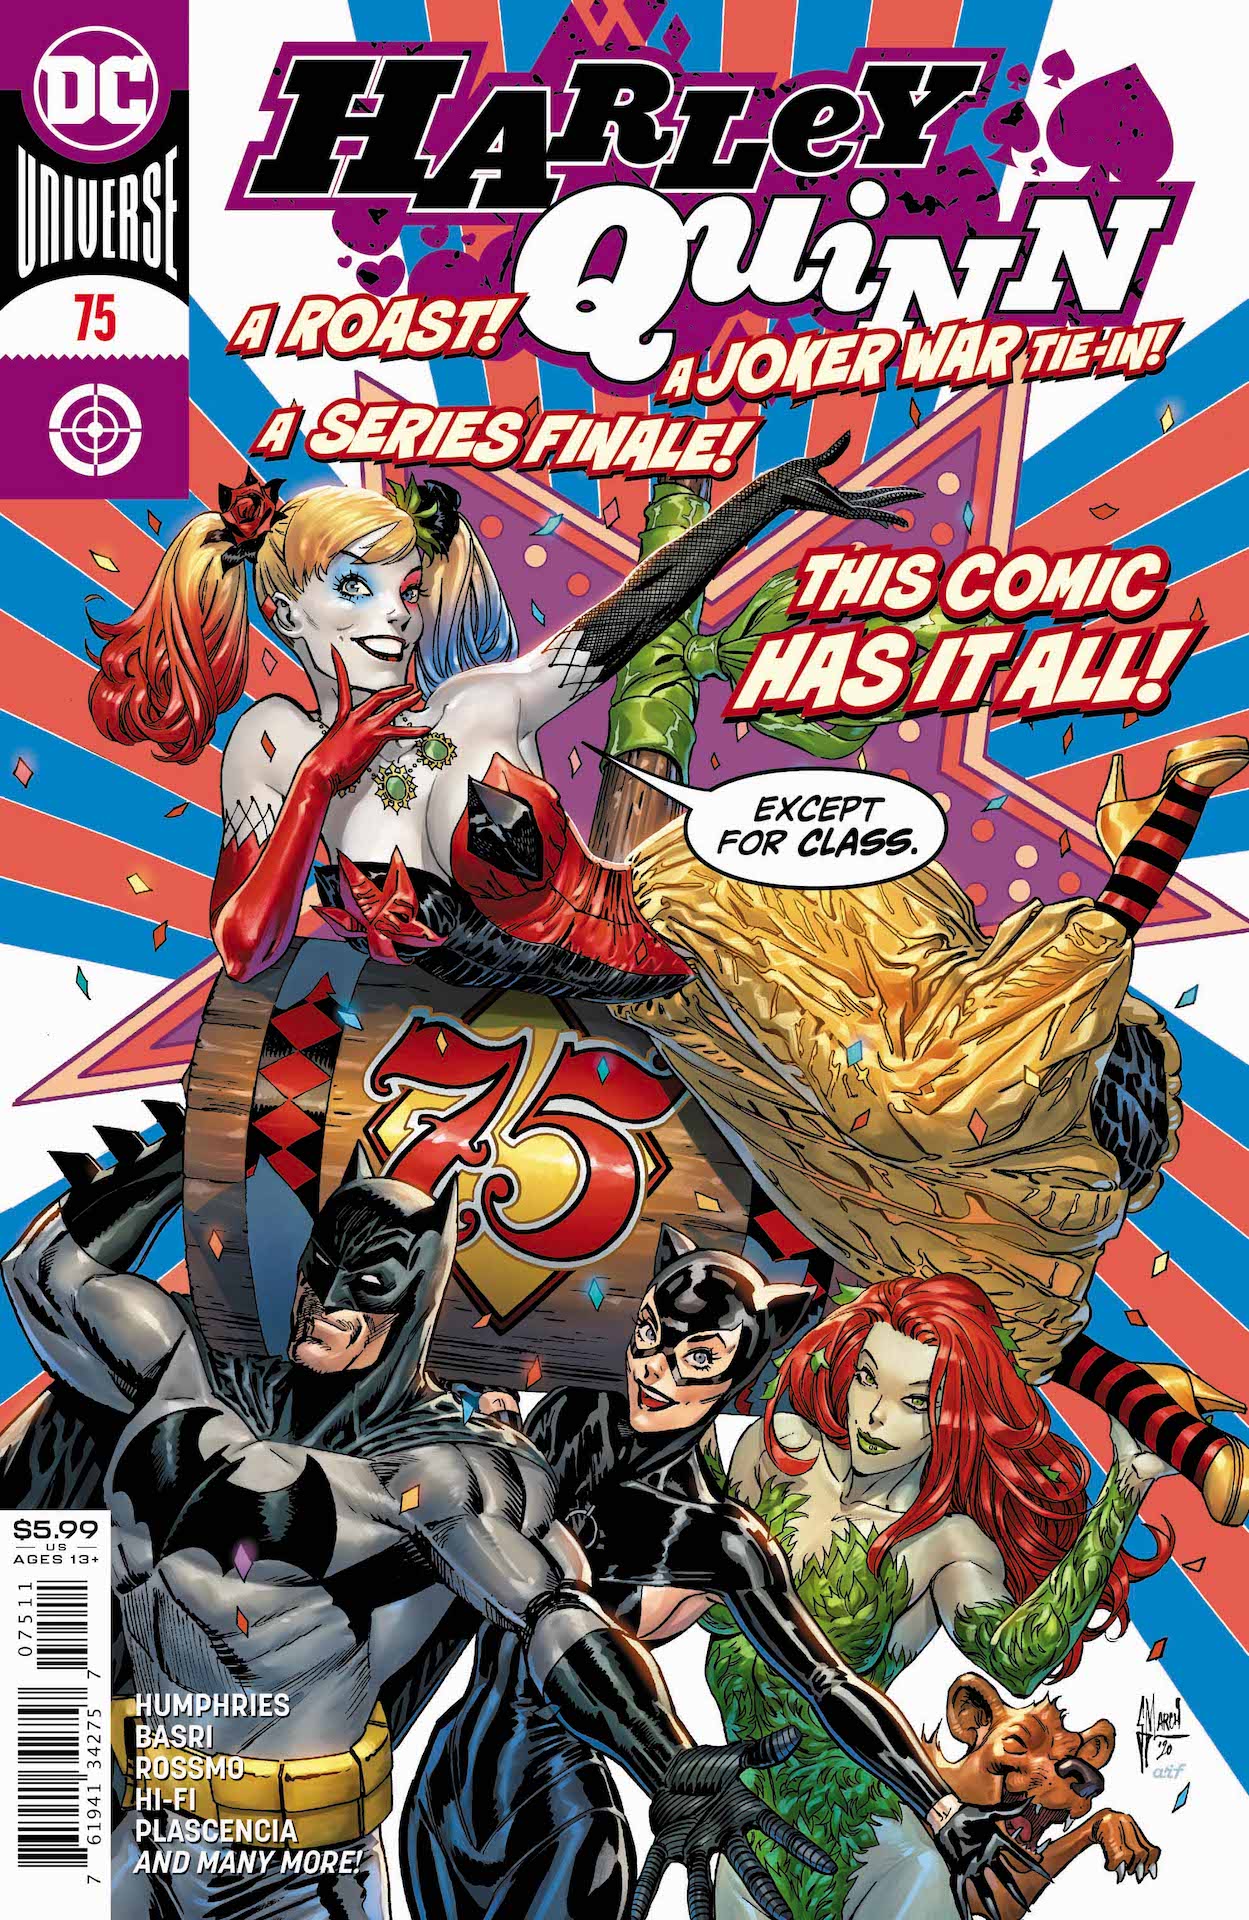 DC Preview: Harley Quinn #75